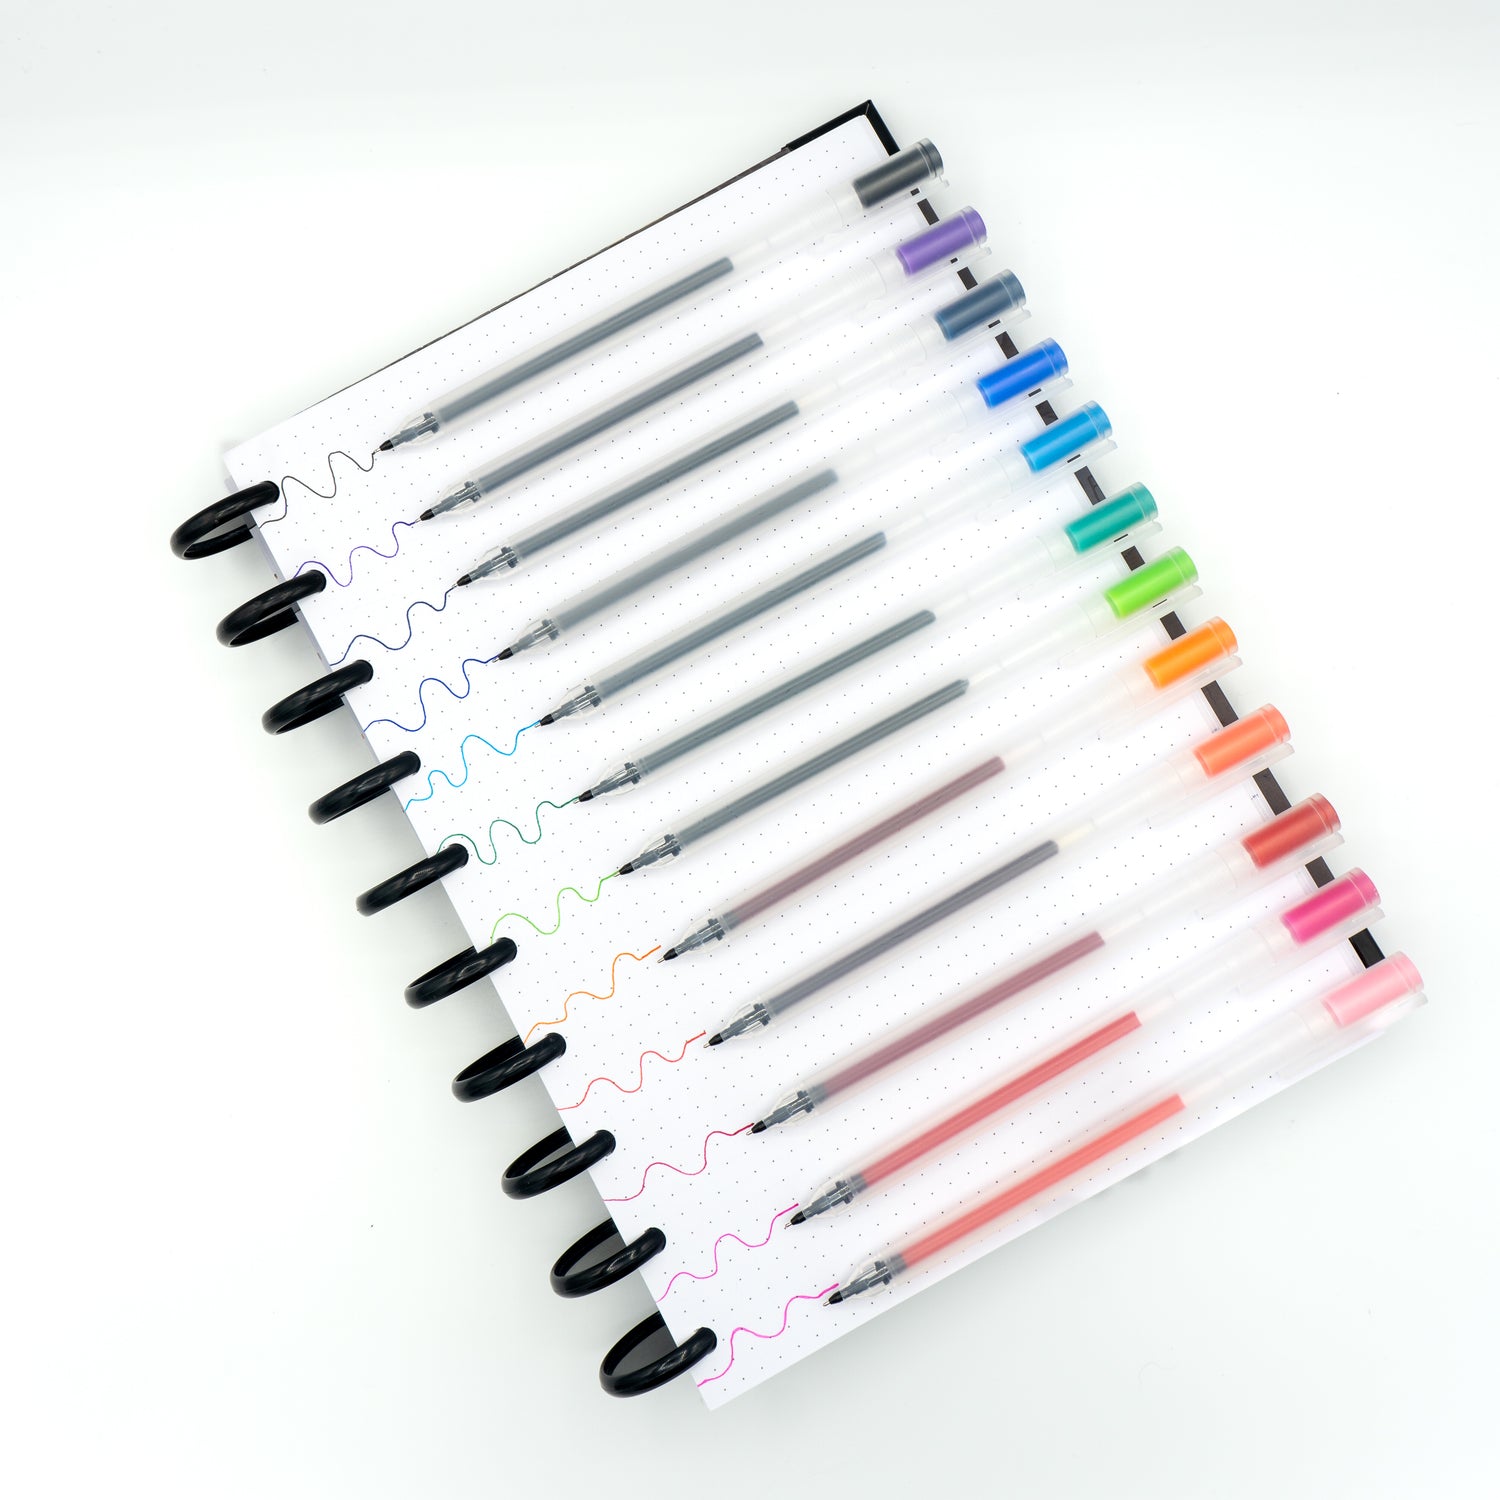 Zebra Pen - Introducing the same soft colored ink you